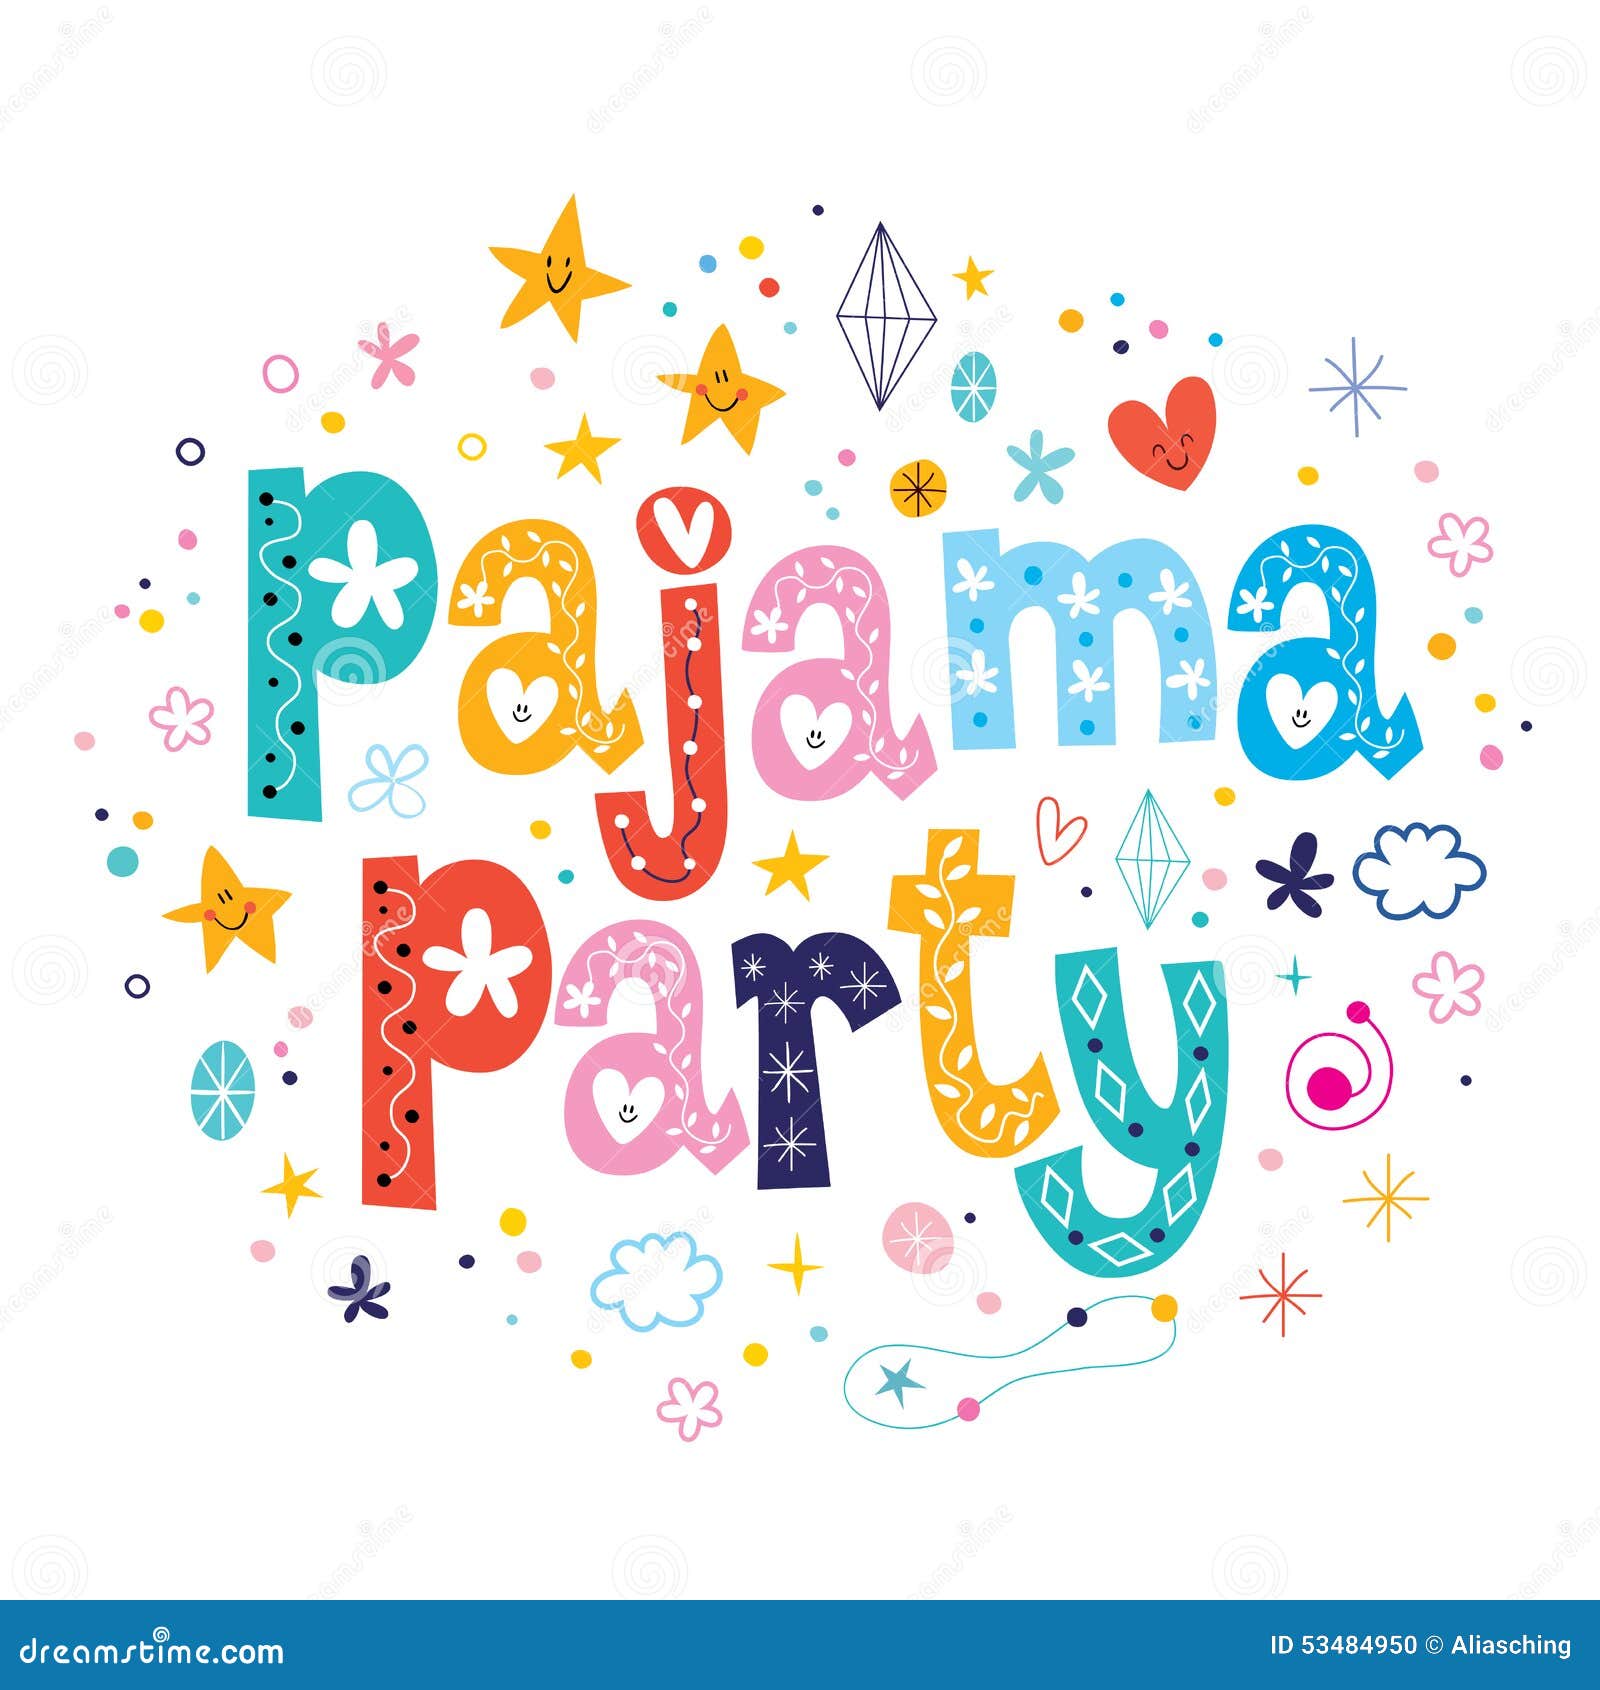 Girly Pajama Party Invitation Card Template Vector Image, 56% OFF